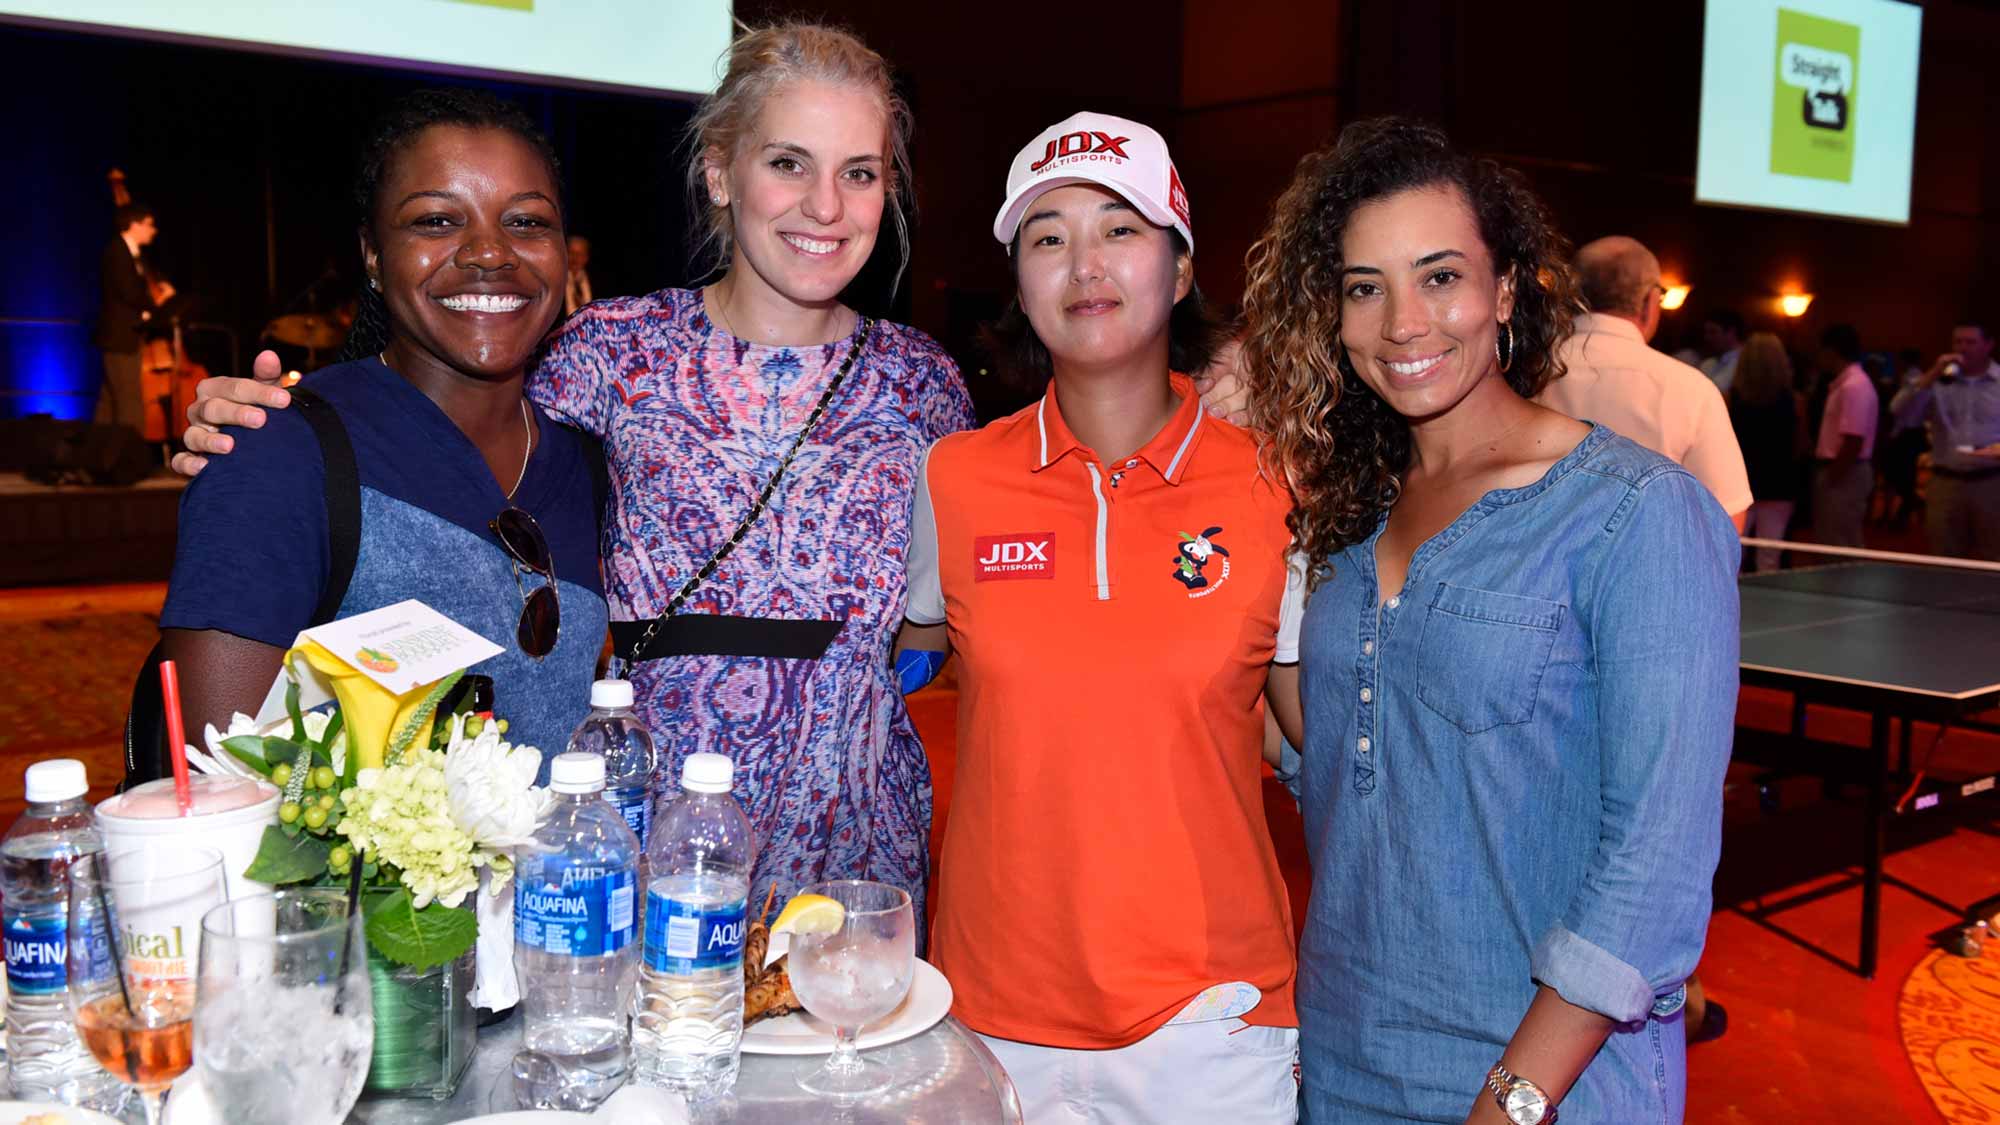 Rookies Mariah Stackhouse and Olafia Kristinsdottir pose for a photo with Min Seo Kwak and Cheyenne Woods at the 2017 Walmart NW Arkansas Championship Presented by P&G